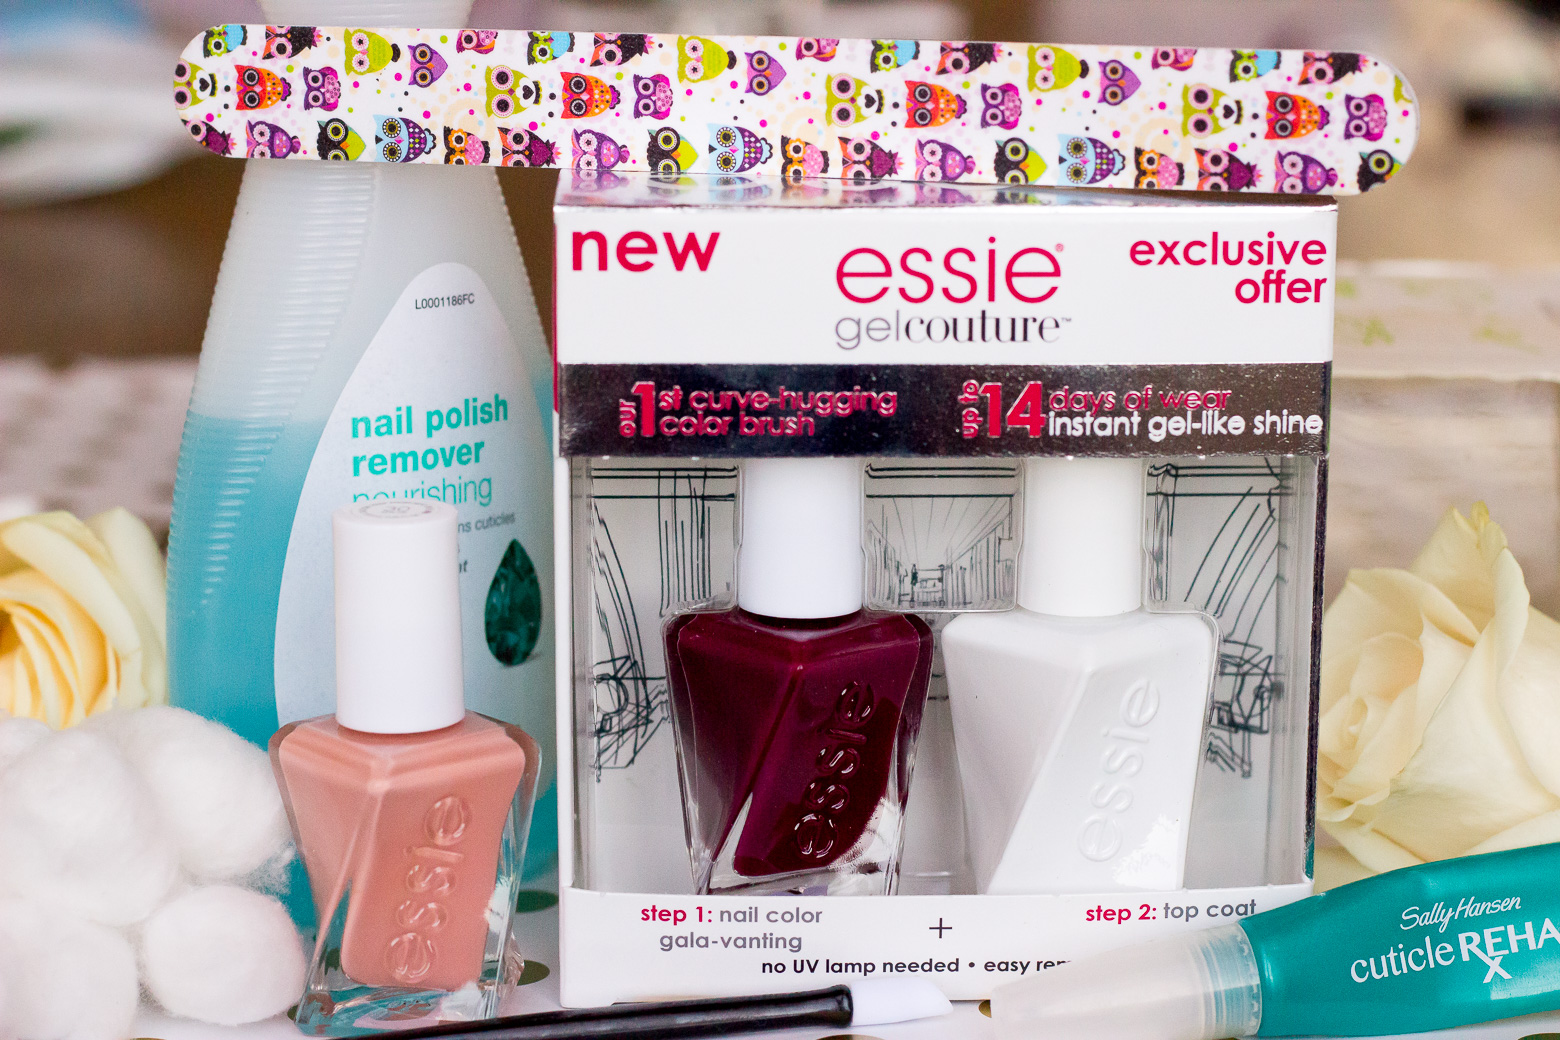 Essie Gel Couture Polish review on Belle Meets World blog